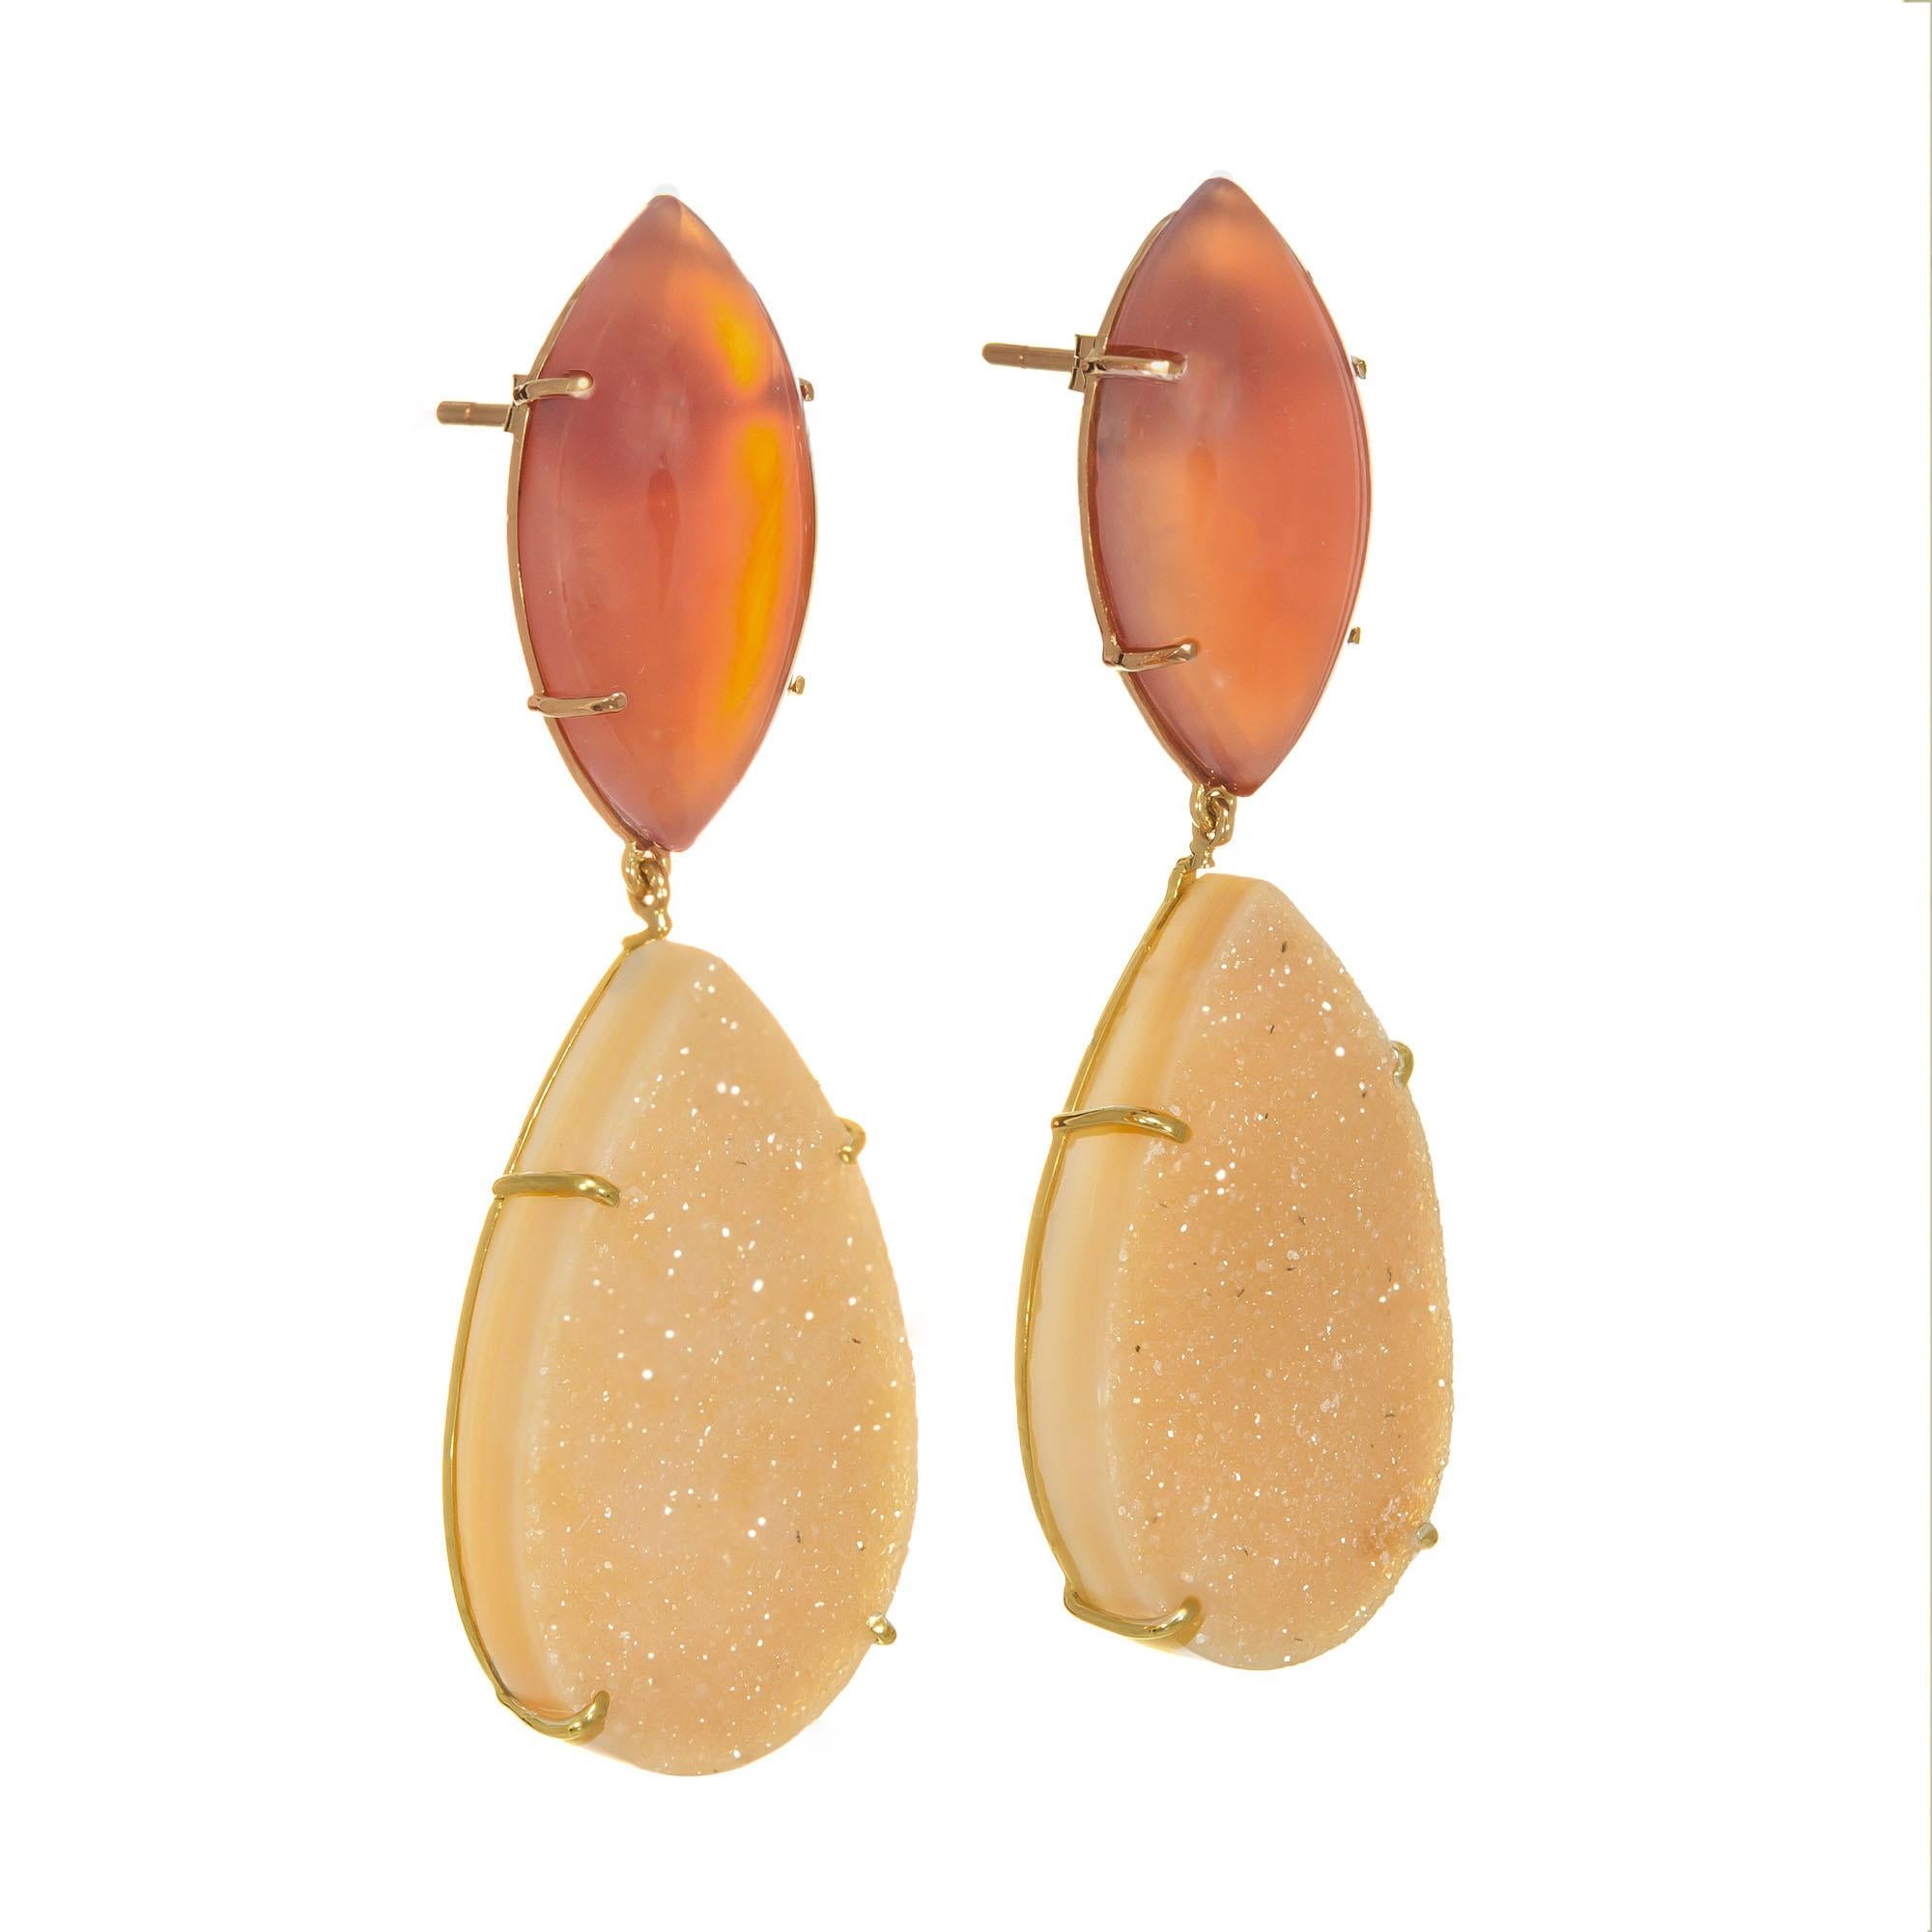 Peter Suchy natural untreated marquis cabochon carnelian and pear shaped agate druzy handmade dangle earrings in 14k yellow gold. 

2 marquise cabochon orange carnelians, approx. 17.00cts 
2 pear shape yellow orange agate druzy slices, approx. .4cts